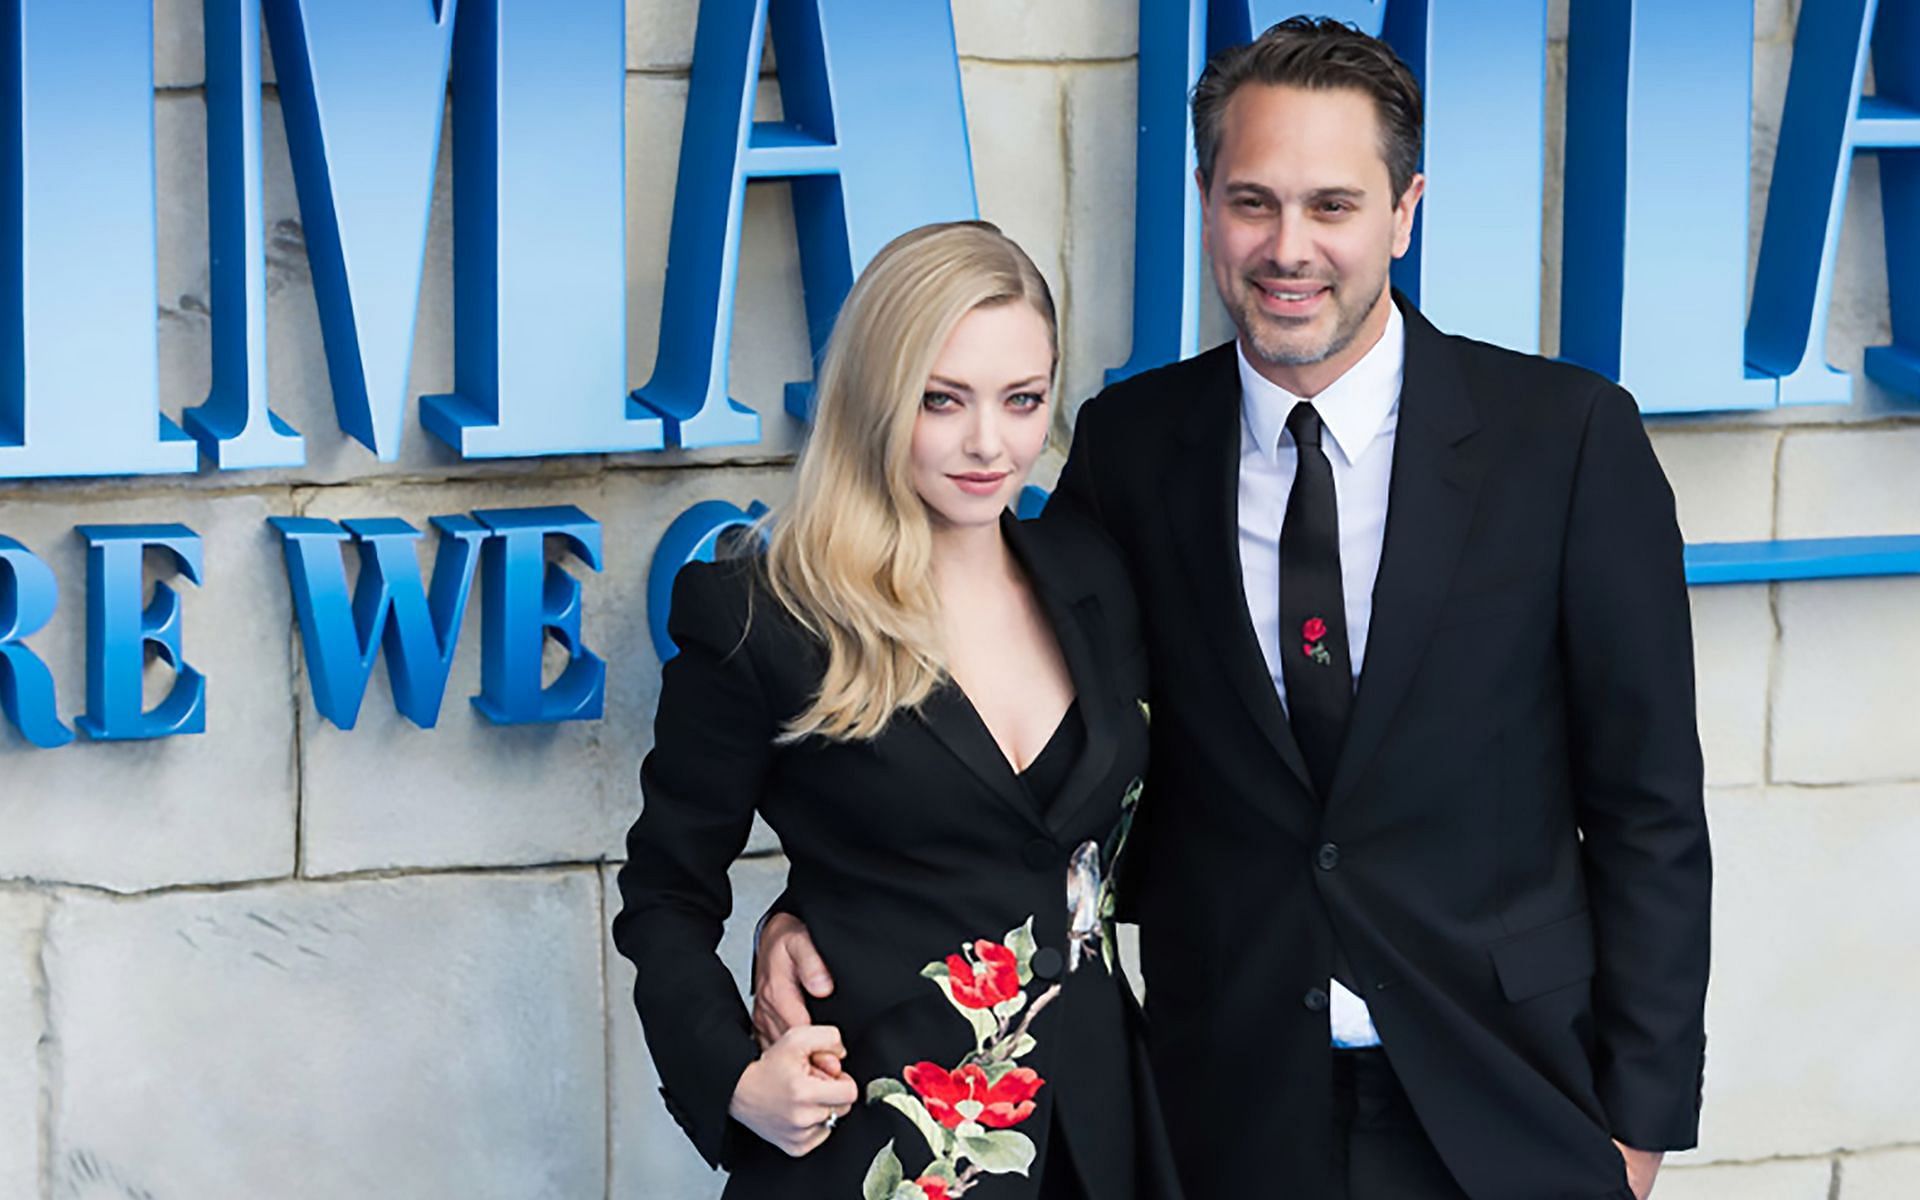 Amanda Seyfried and Thomas Sadoski tied the knot in March 2017 (Image via Getty/ Future Publishing)